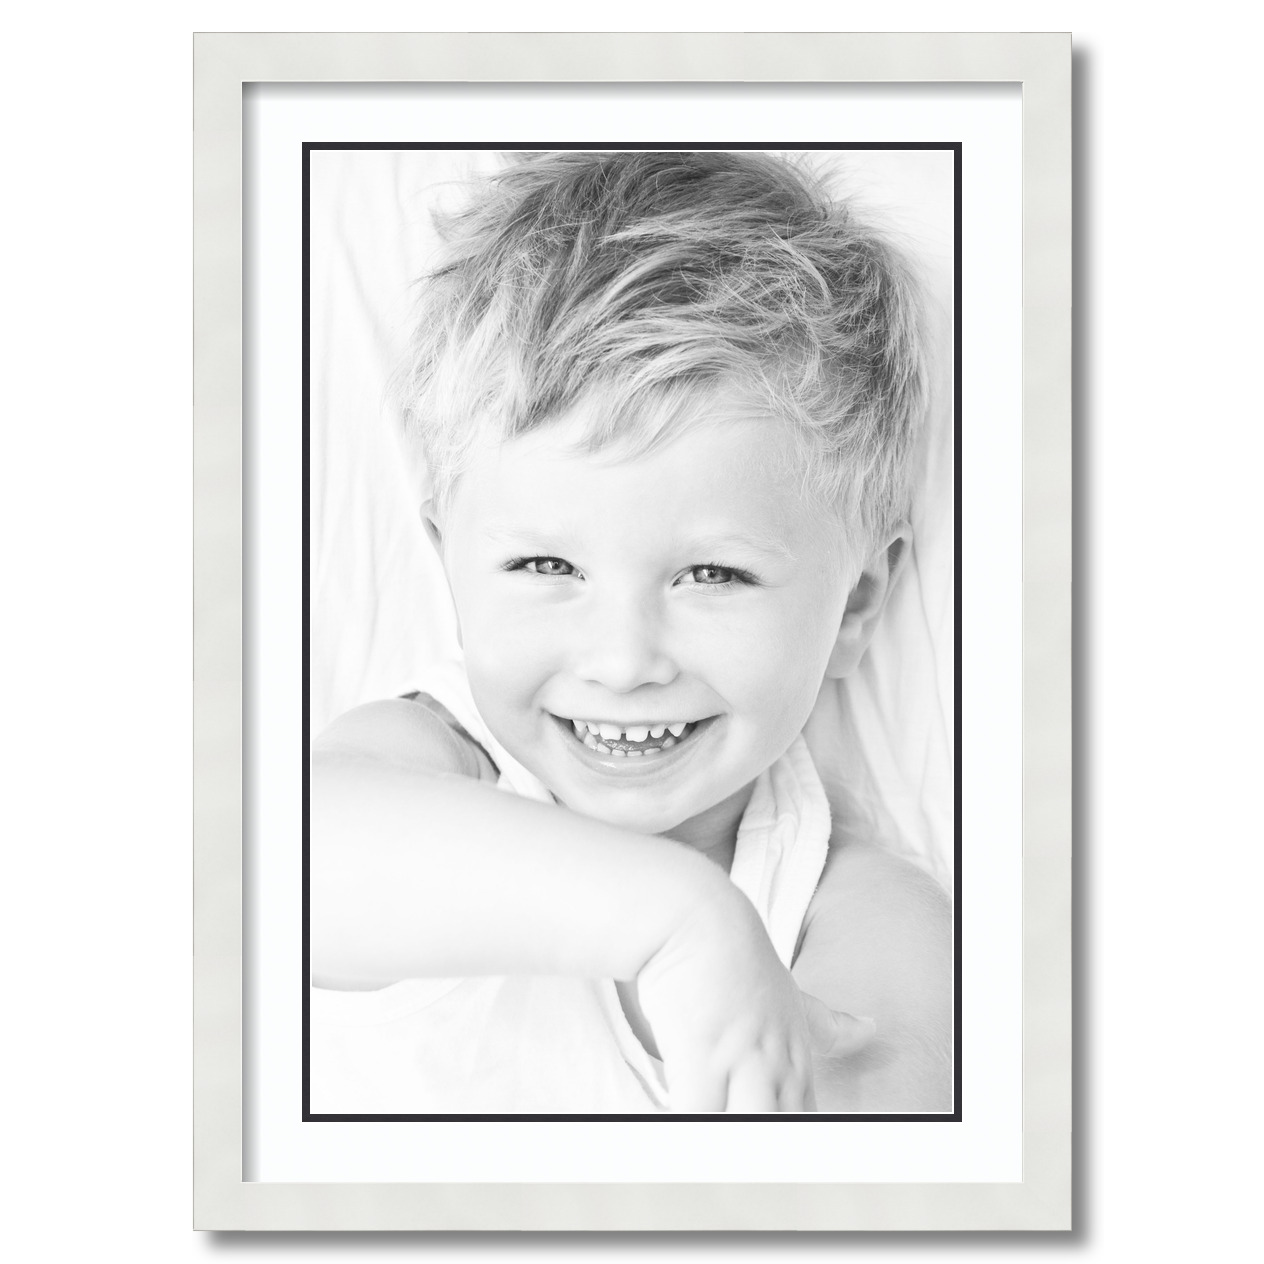 16x24 Opening ArtToFrames Matted 20x28 White Picture Frame with 2" Double Mat